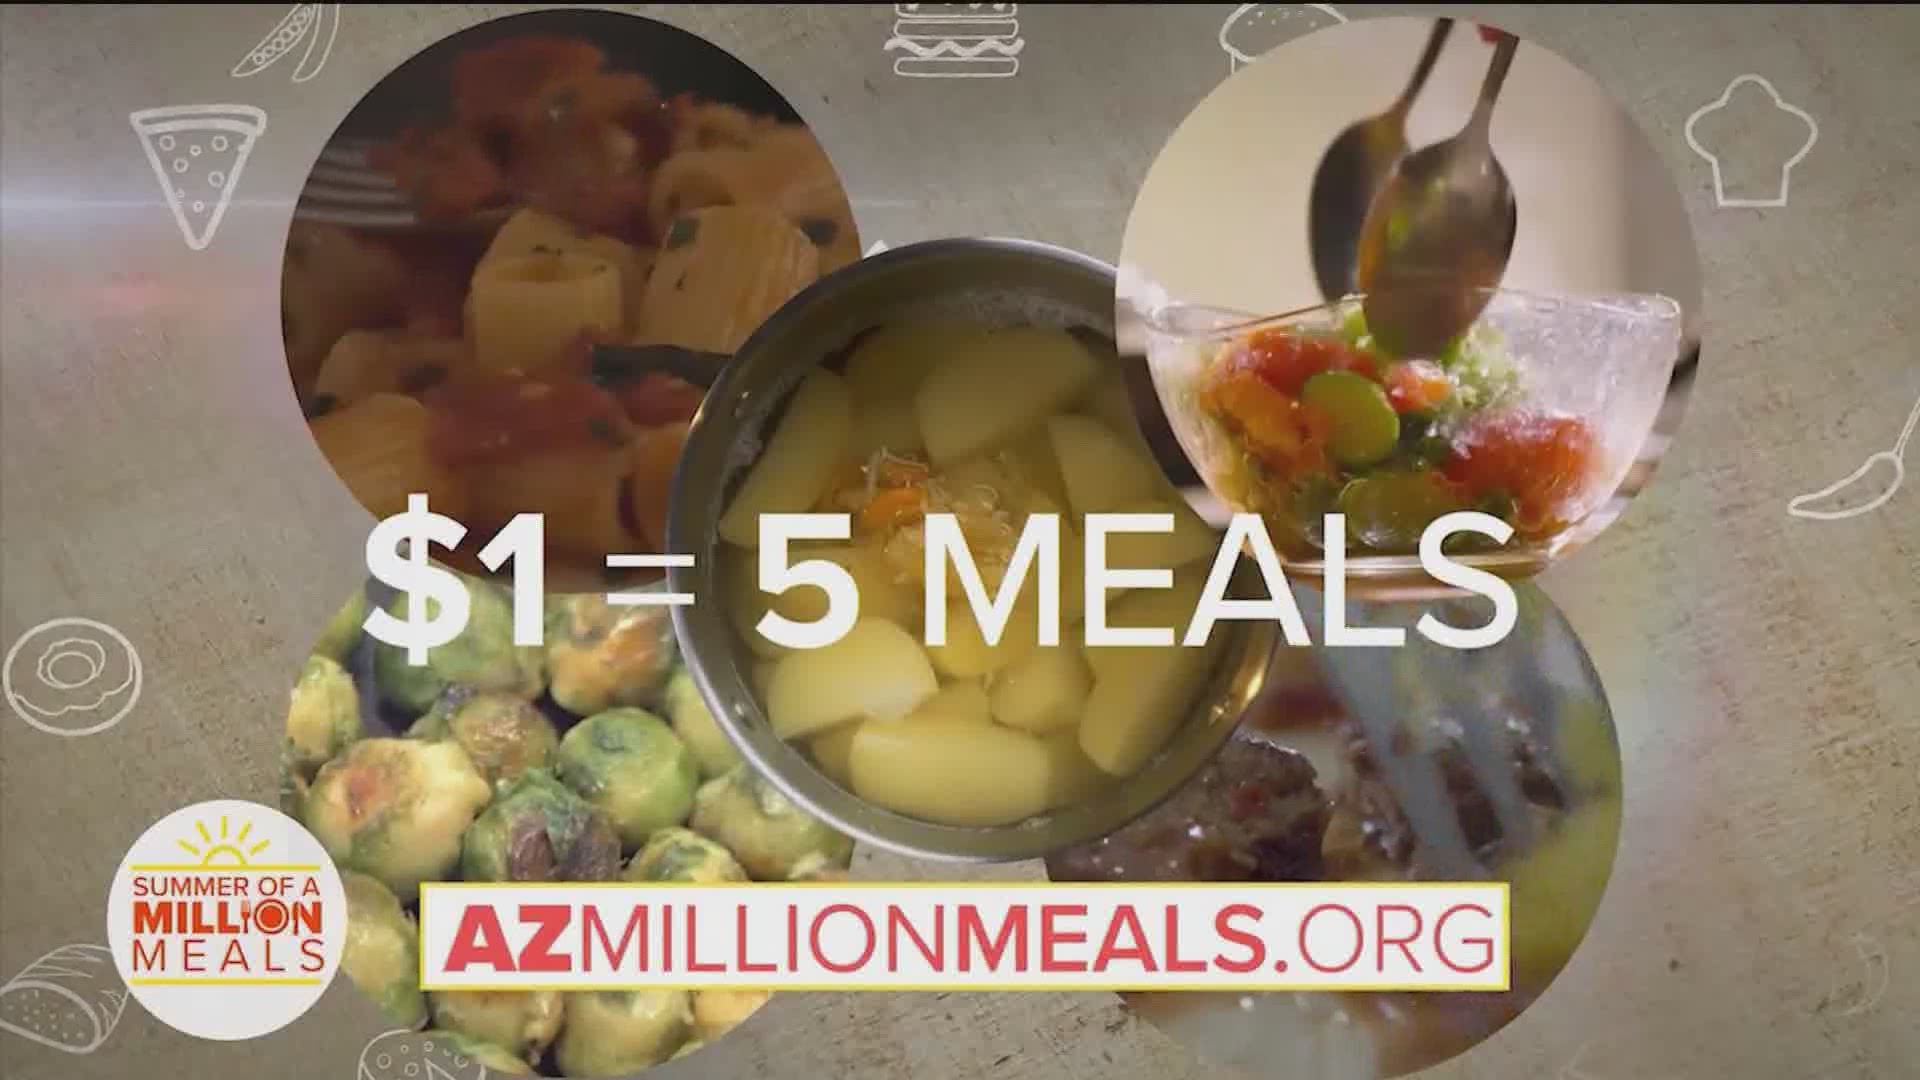 Dave Richins with United Food Bank shares how just a few dollars can make all the difference to Arizona Families with the Summer of a Million Meals Campaign